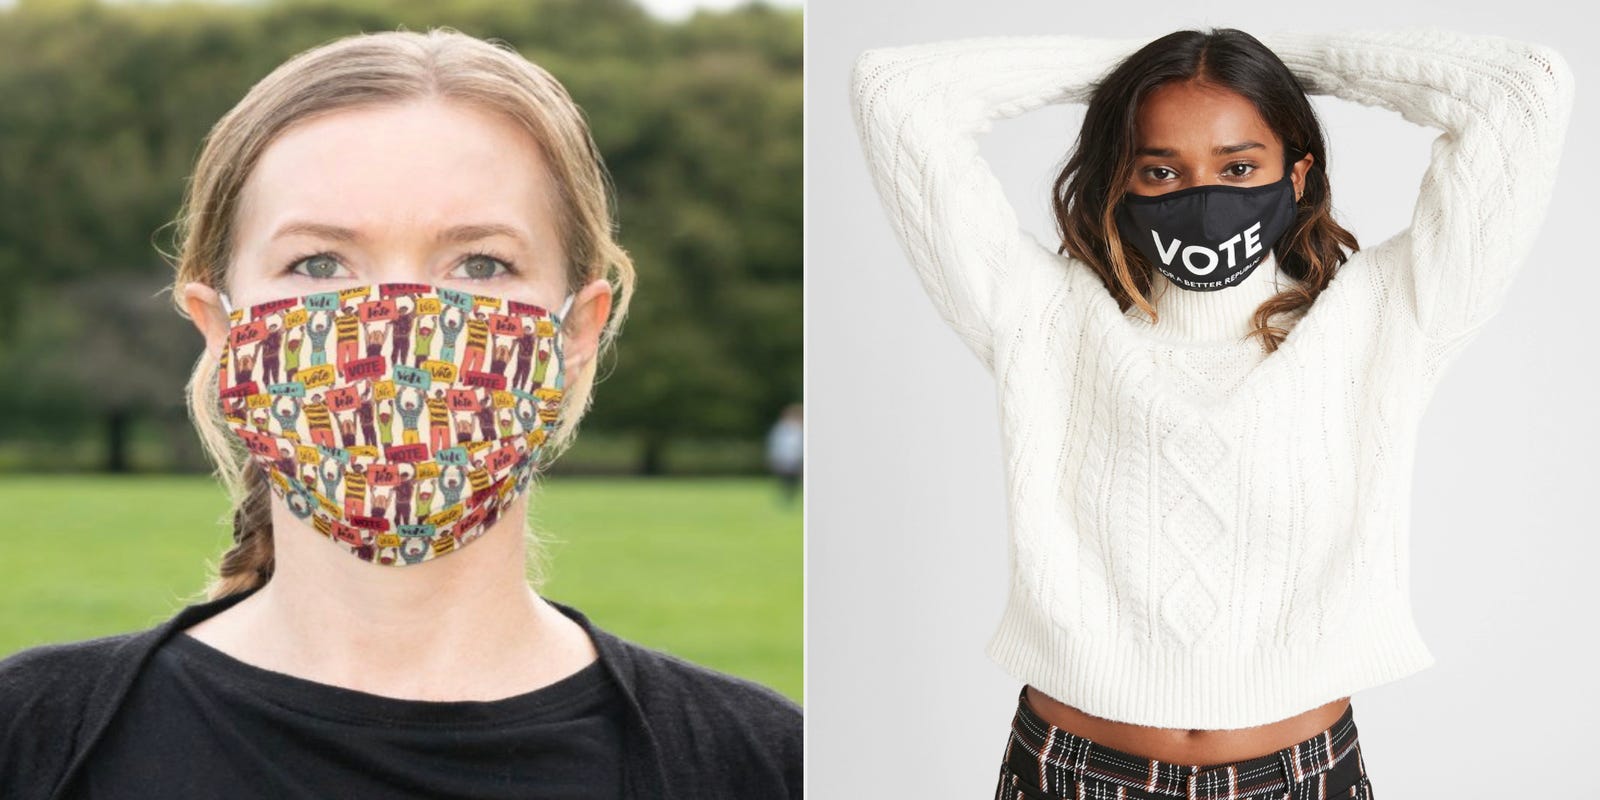 10 face masks you can wear to promote voting